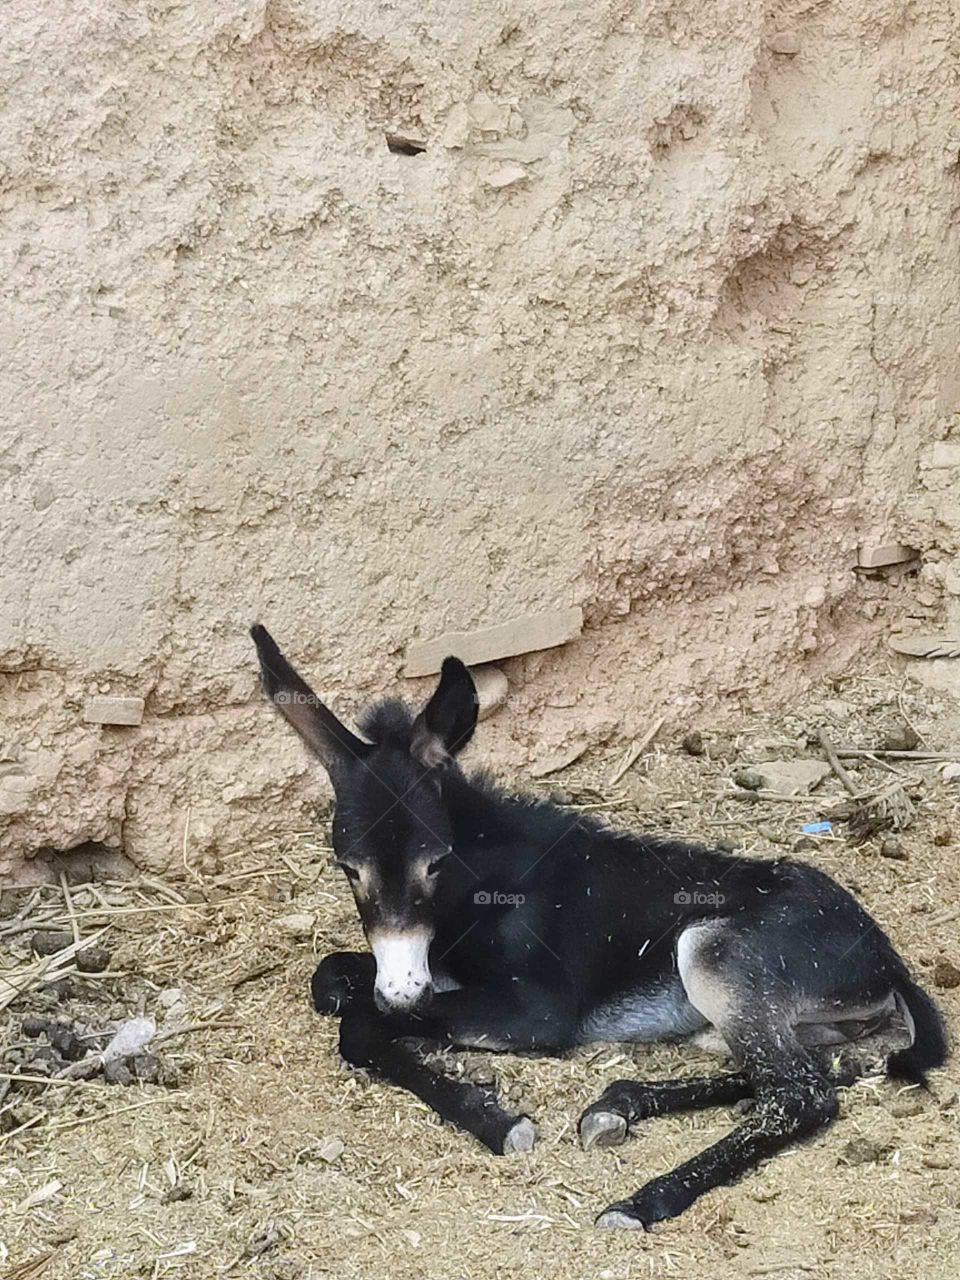 A small donkey waiting for its mother to come ...the photo taken in Asrir ,a village in the region of Goulimine, Morocco